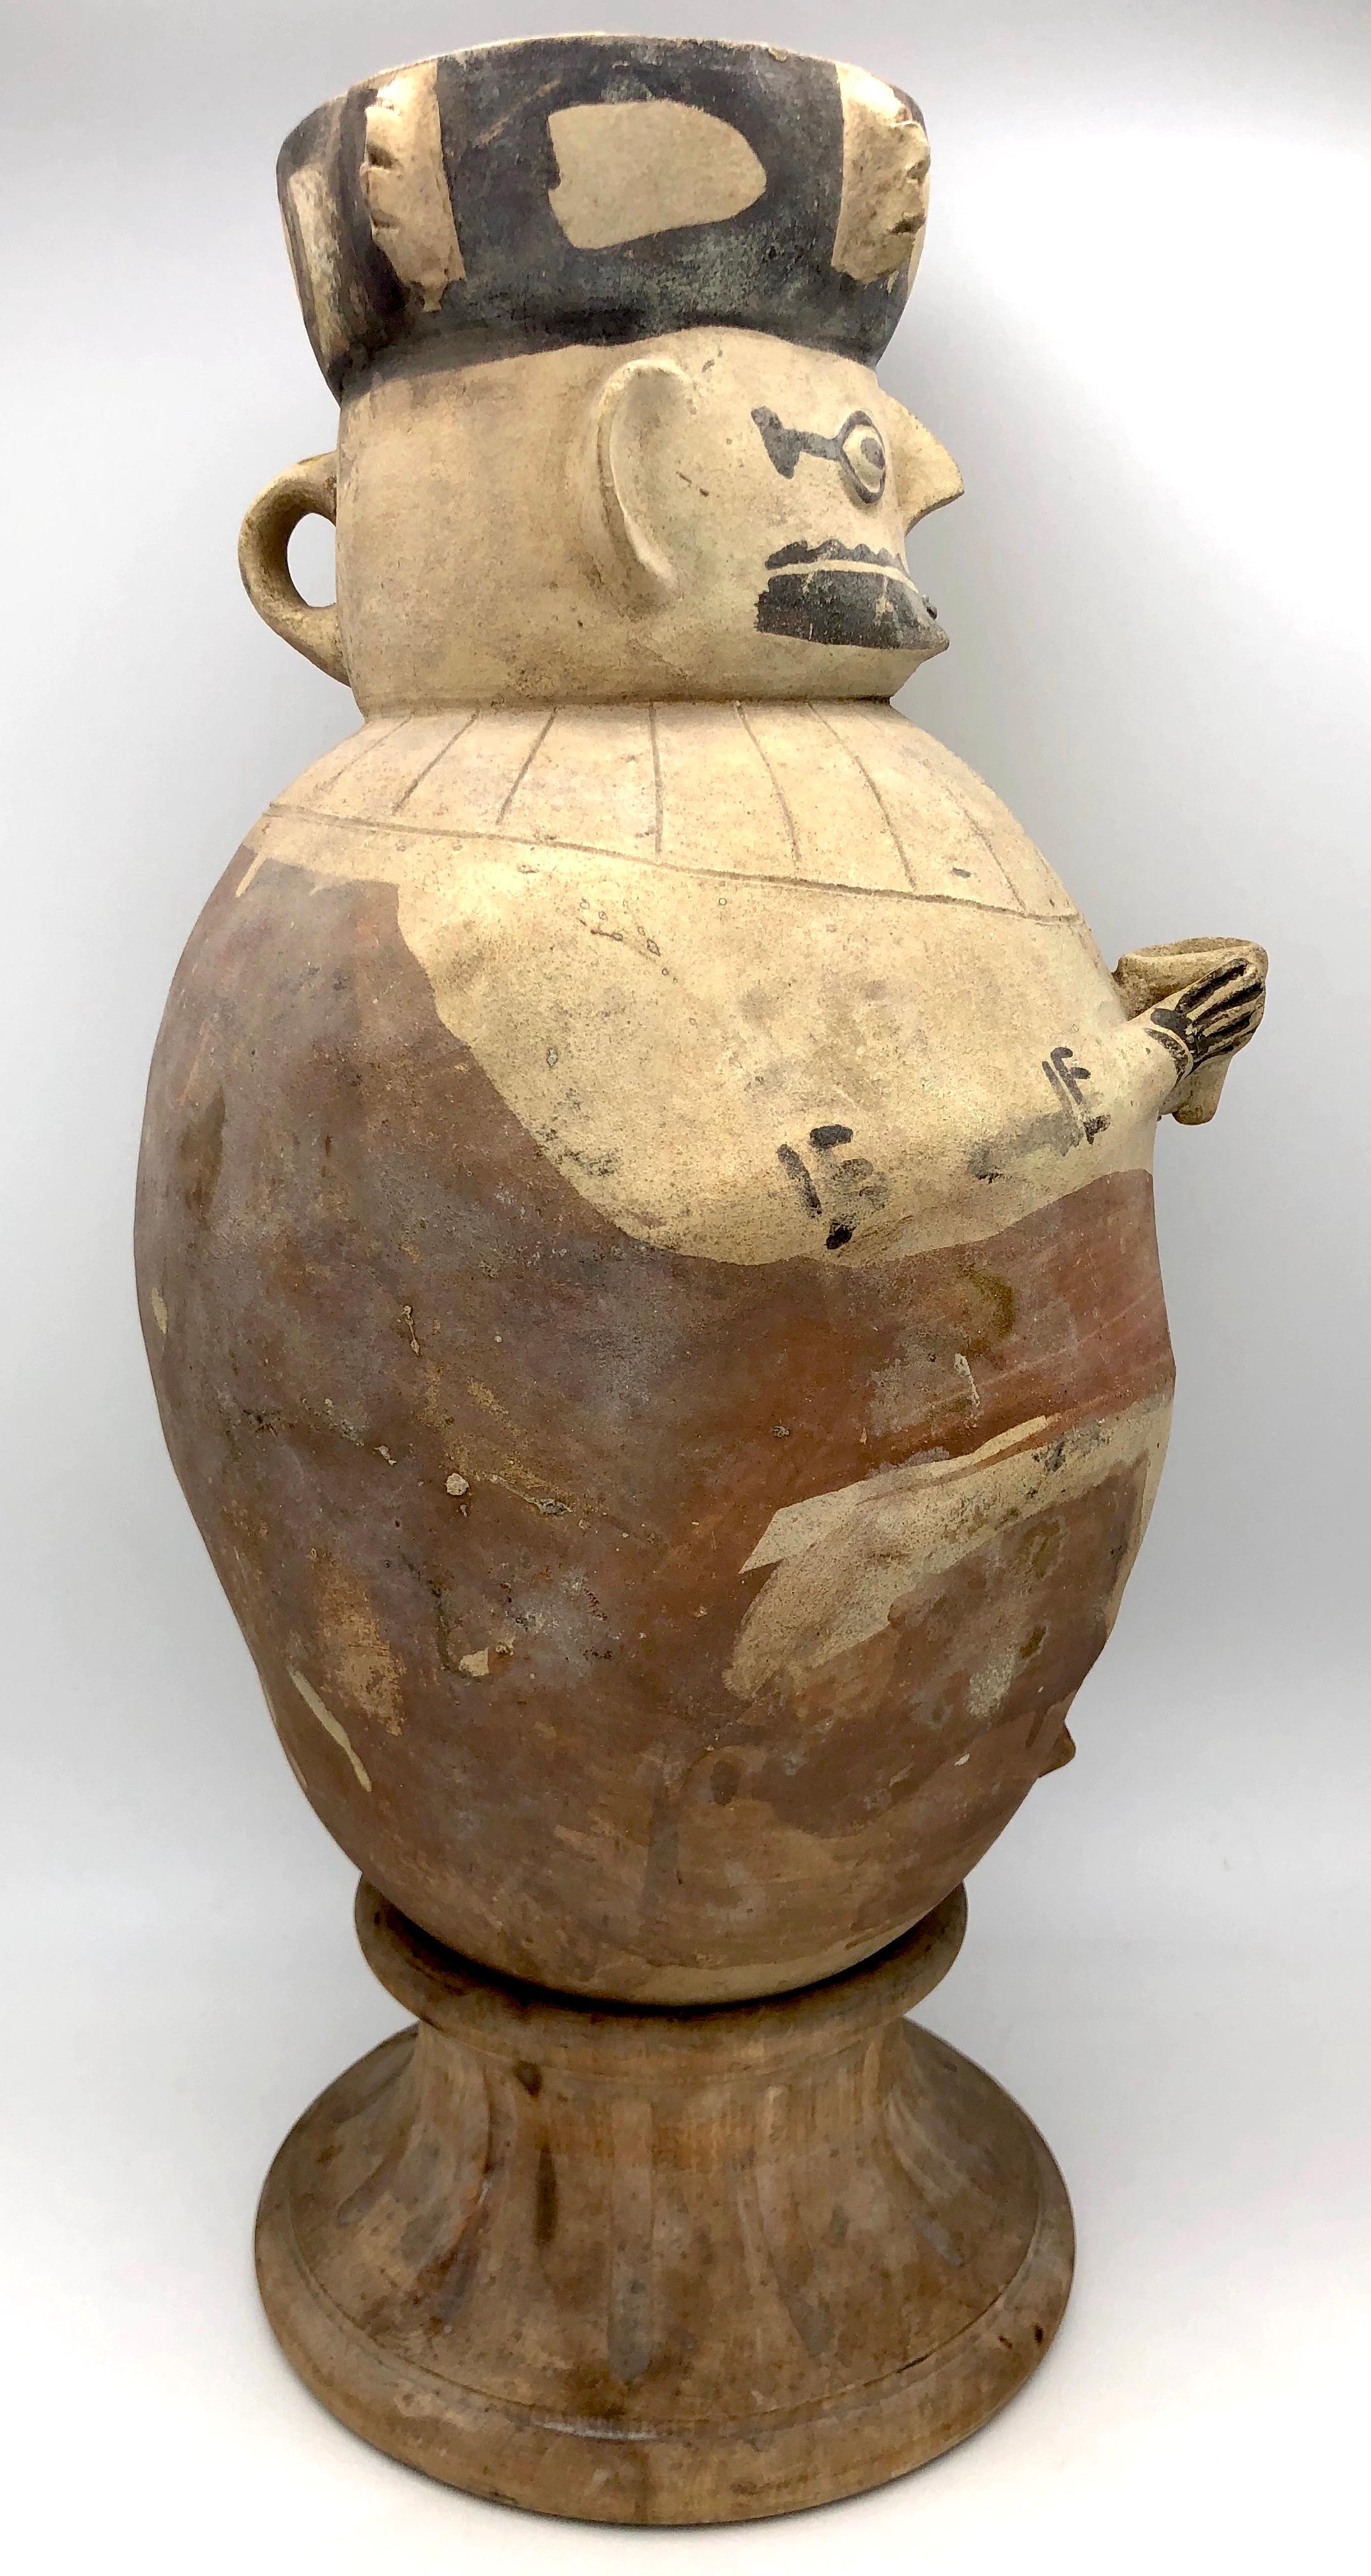 Anthropomorphic urn vessel made out of clay in Peru during the Chancay period between the 11th and 14th century.